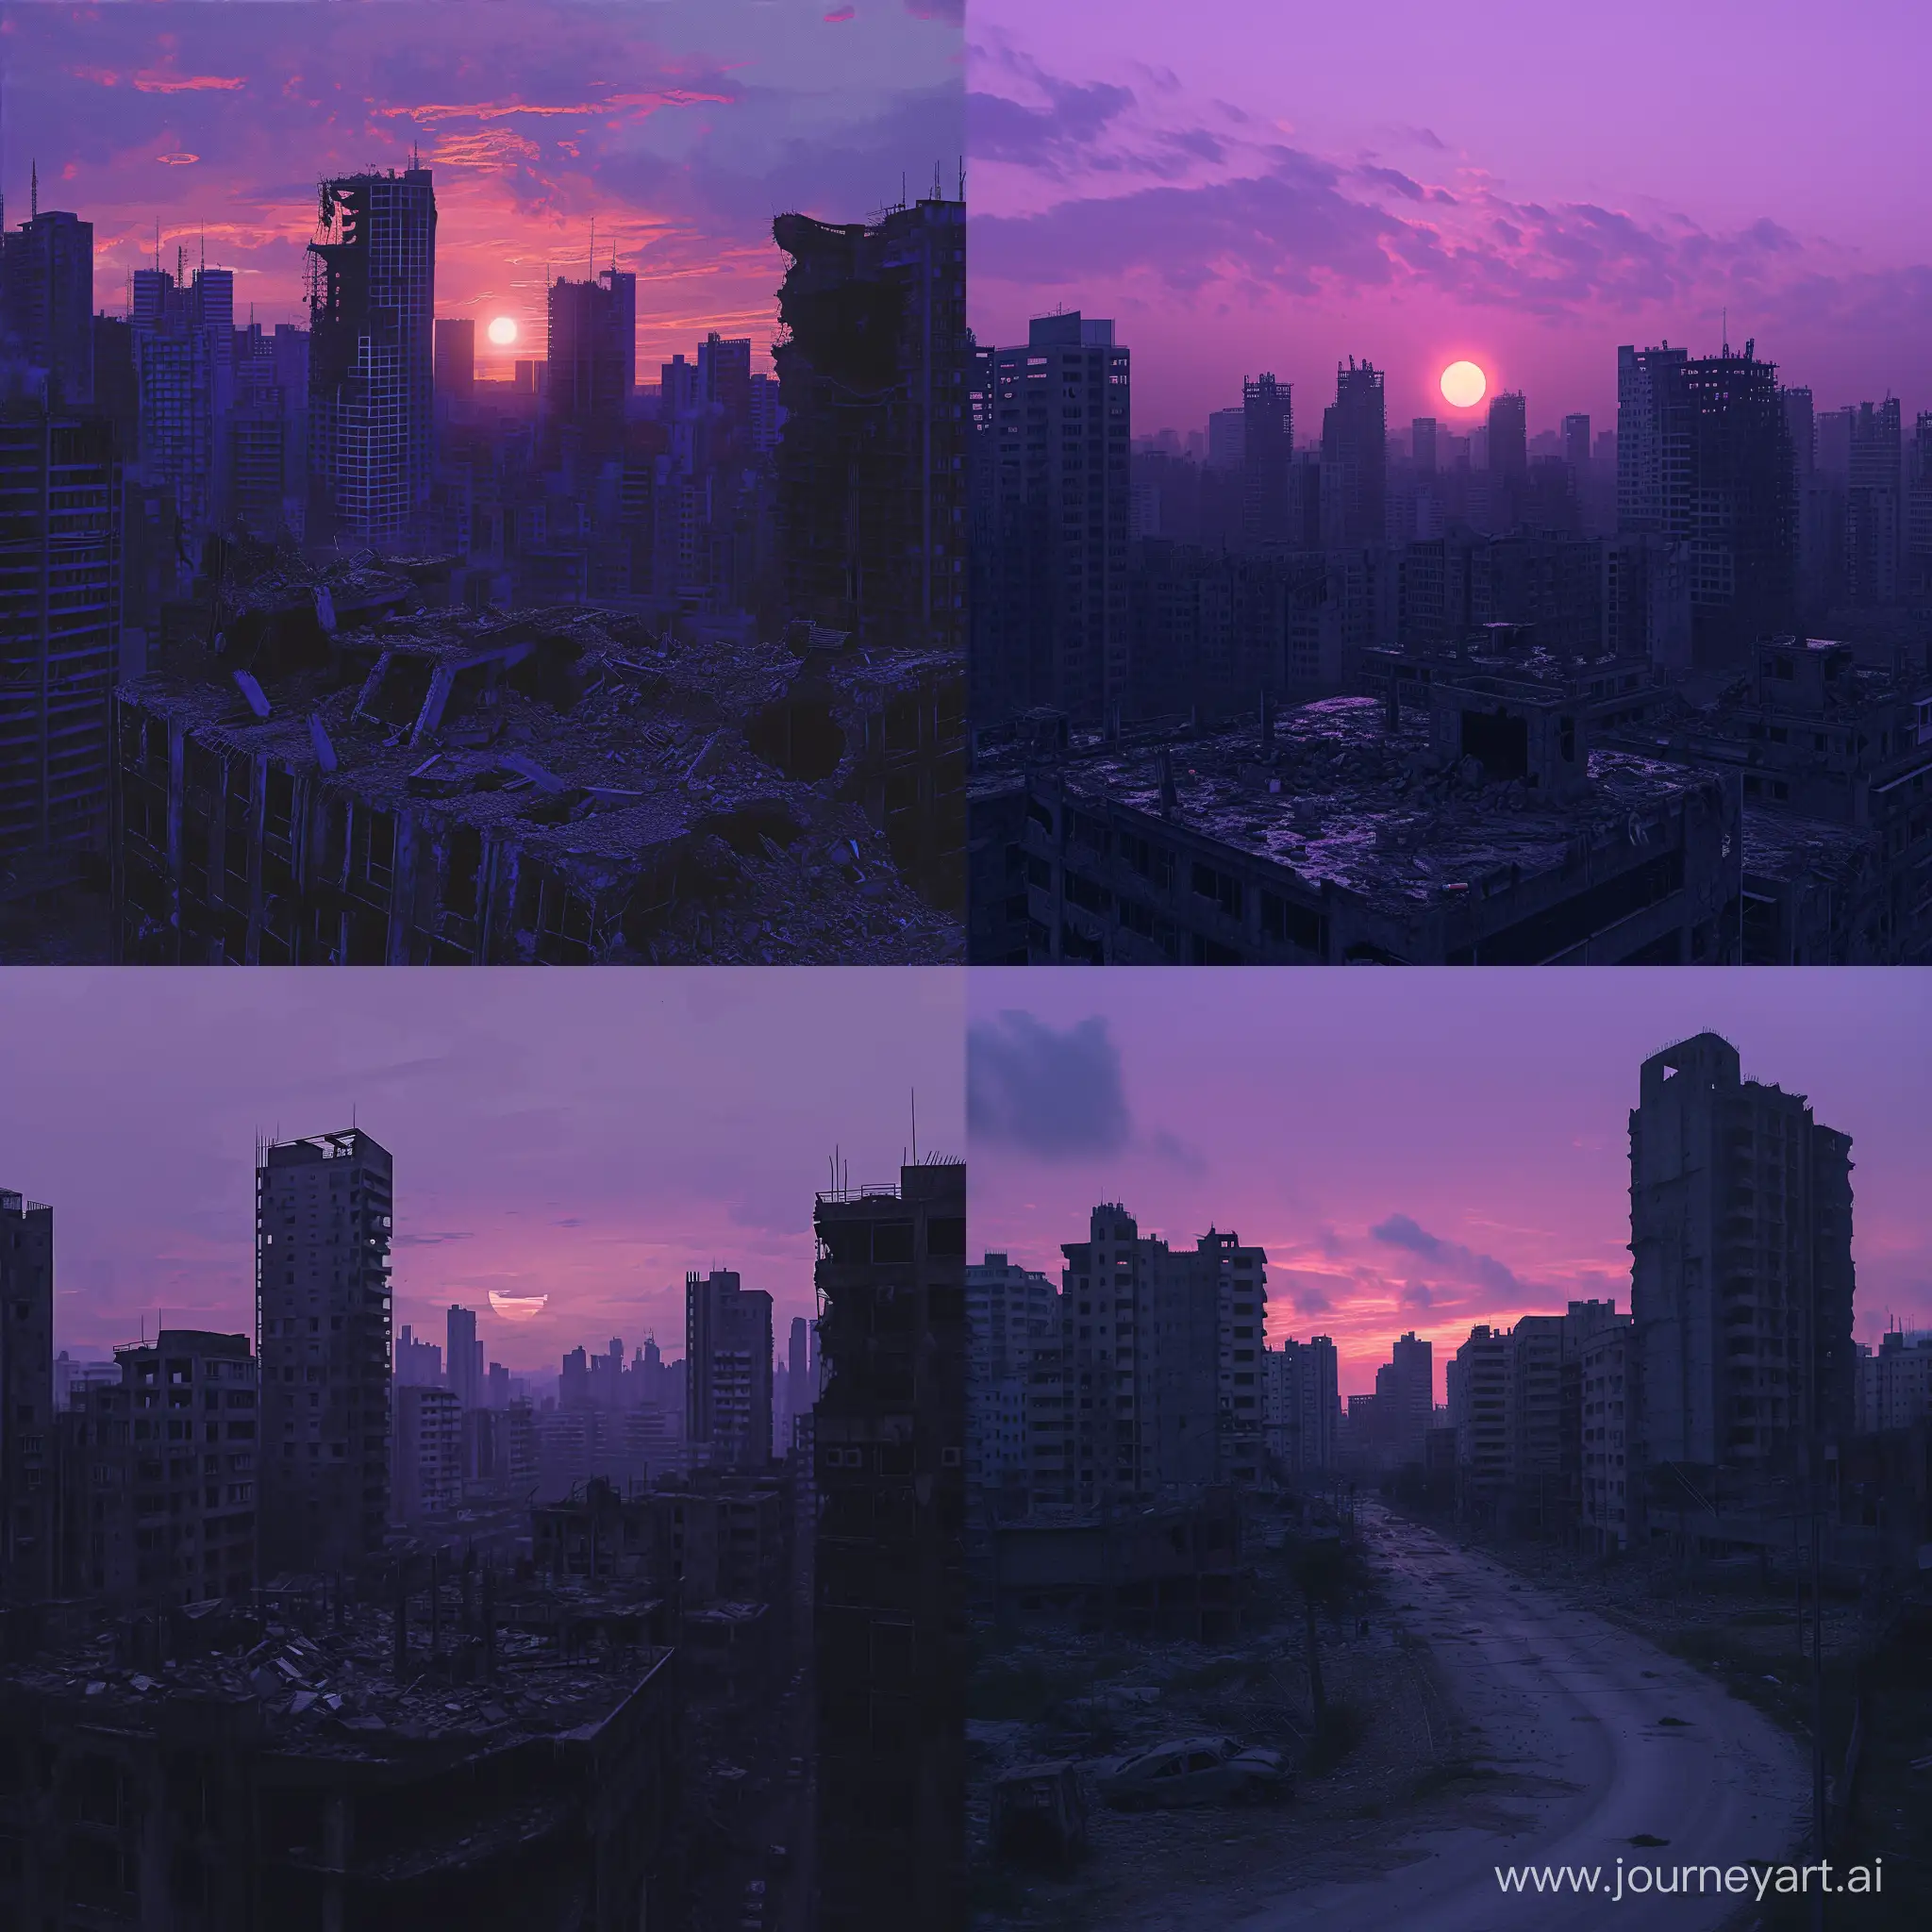 A slightly destroyed city with high-rise buildings against the backdrop of a purple twilight sunset 